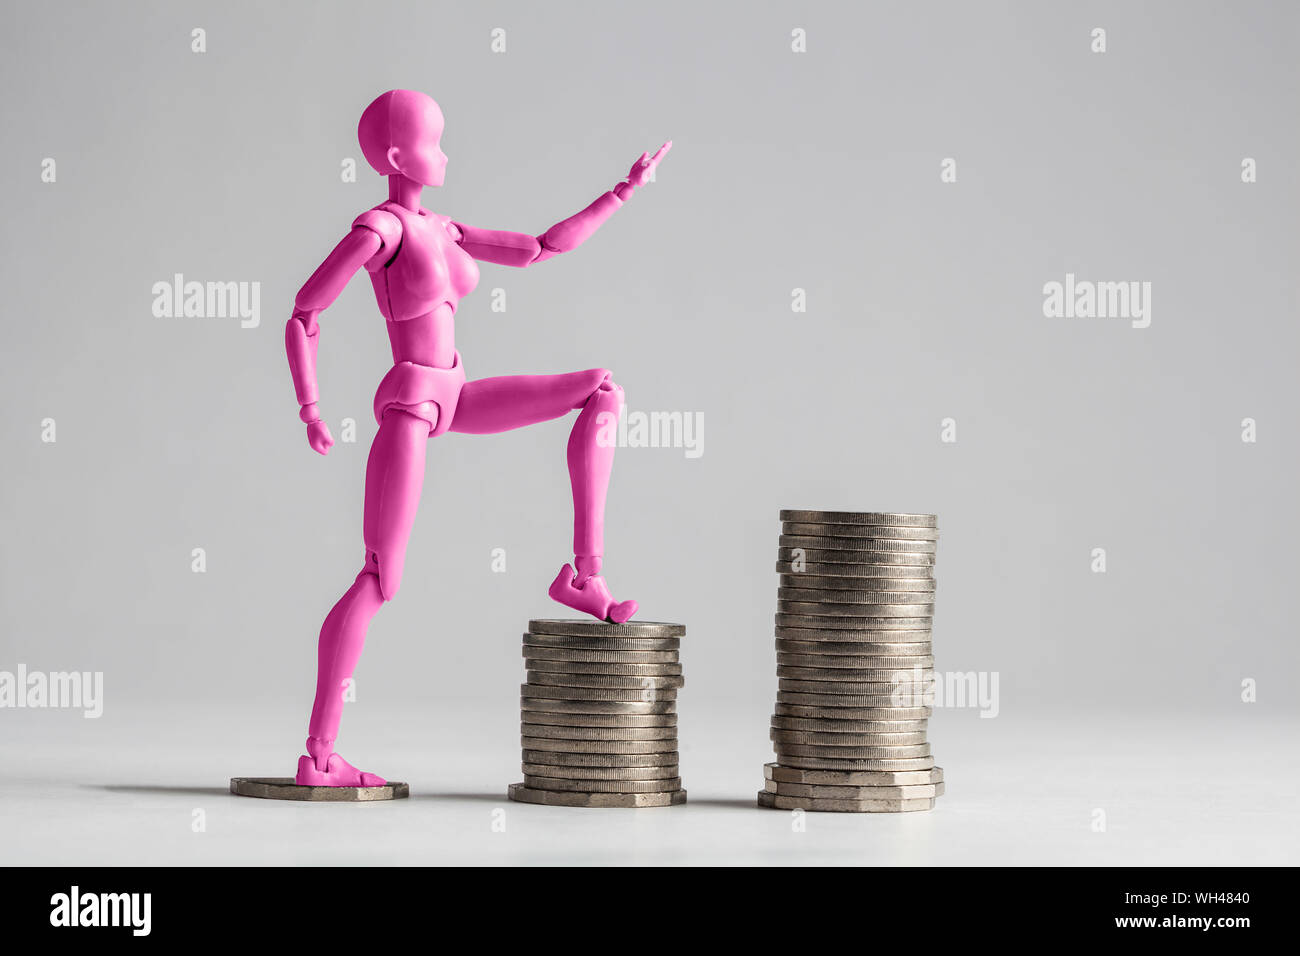 Magenta Figurine On Stacked Coins Against White Background Stock Photo